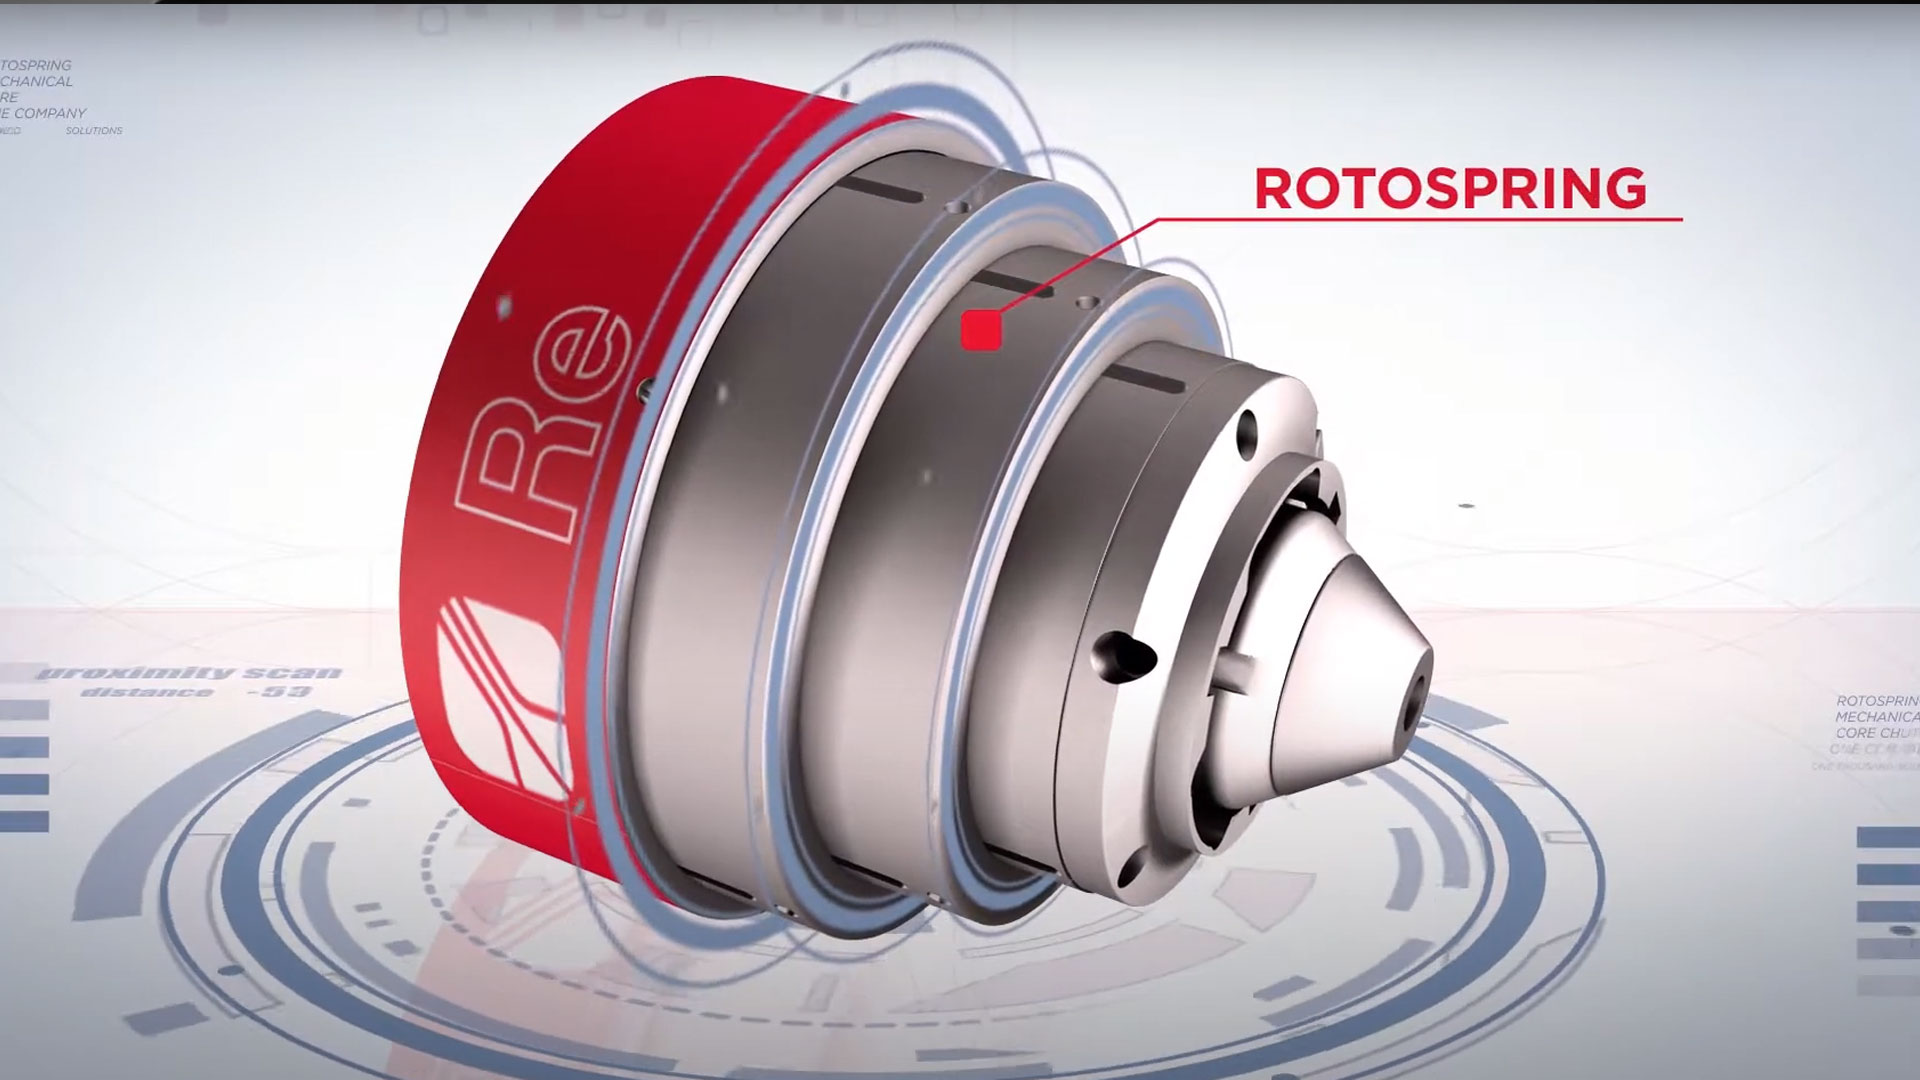 RE PRODUCT - Rotospring  - https://www.youtube.com/watch?v=Kwrq_xn83sw&ab_channel=CommunicAnimationSrl